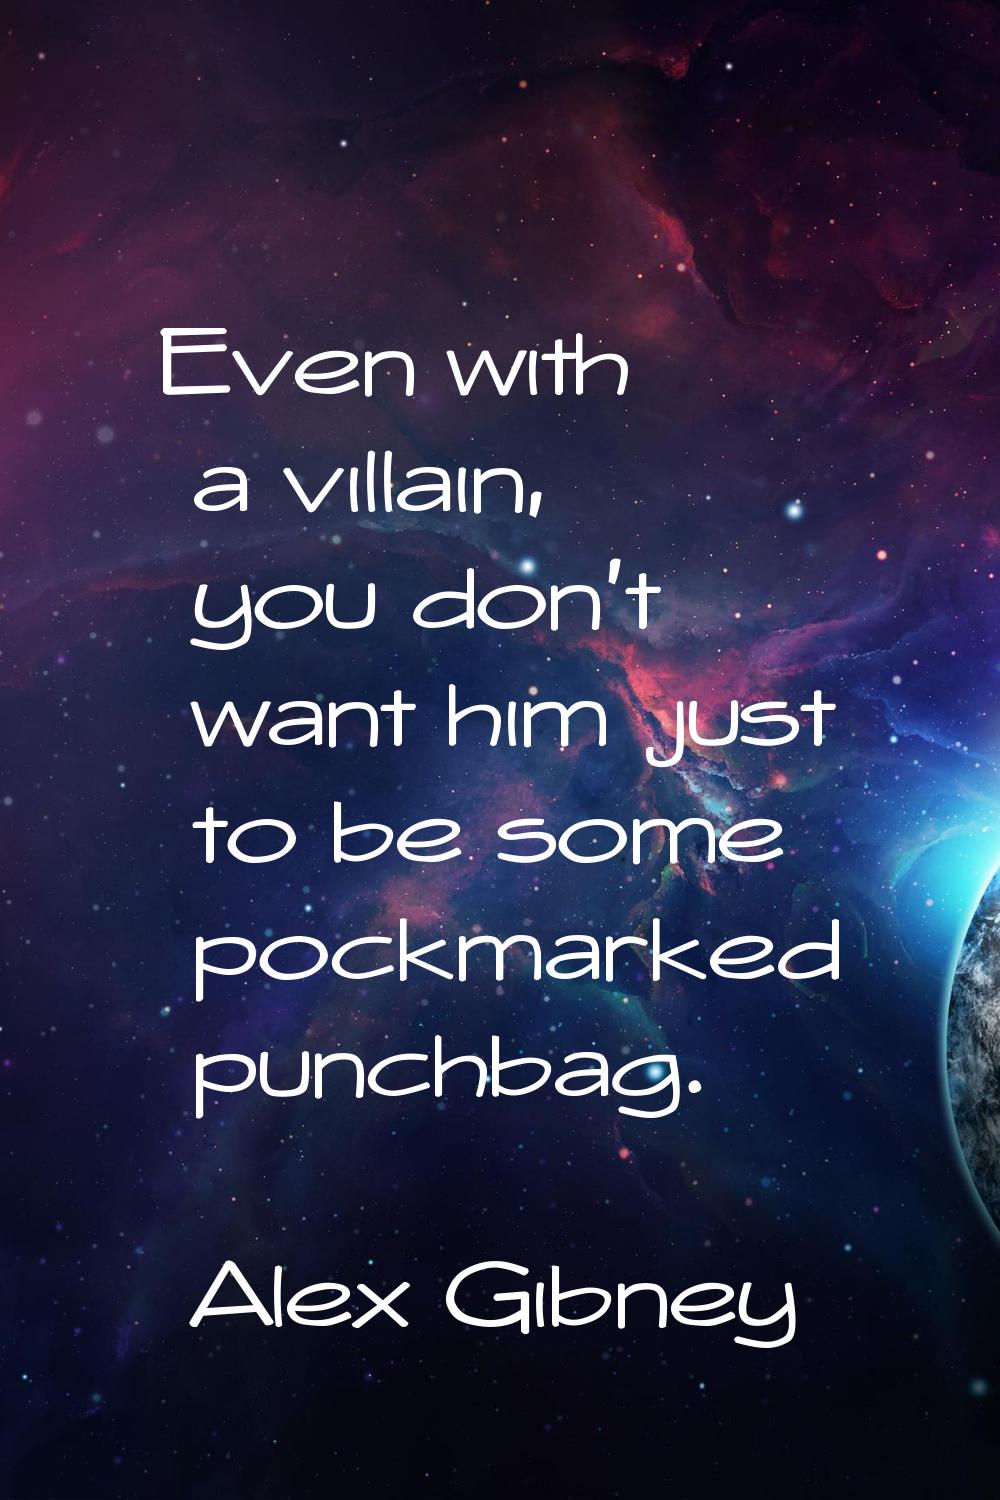 Even with a villain, you don't want him just to be some pockmarked punchbag.